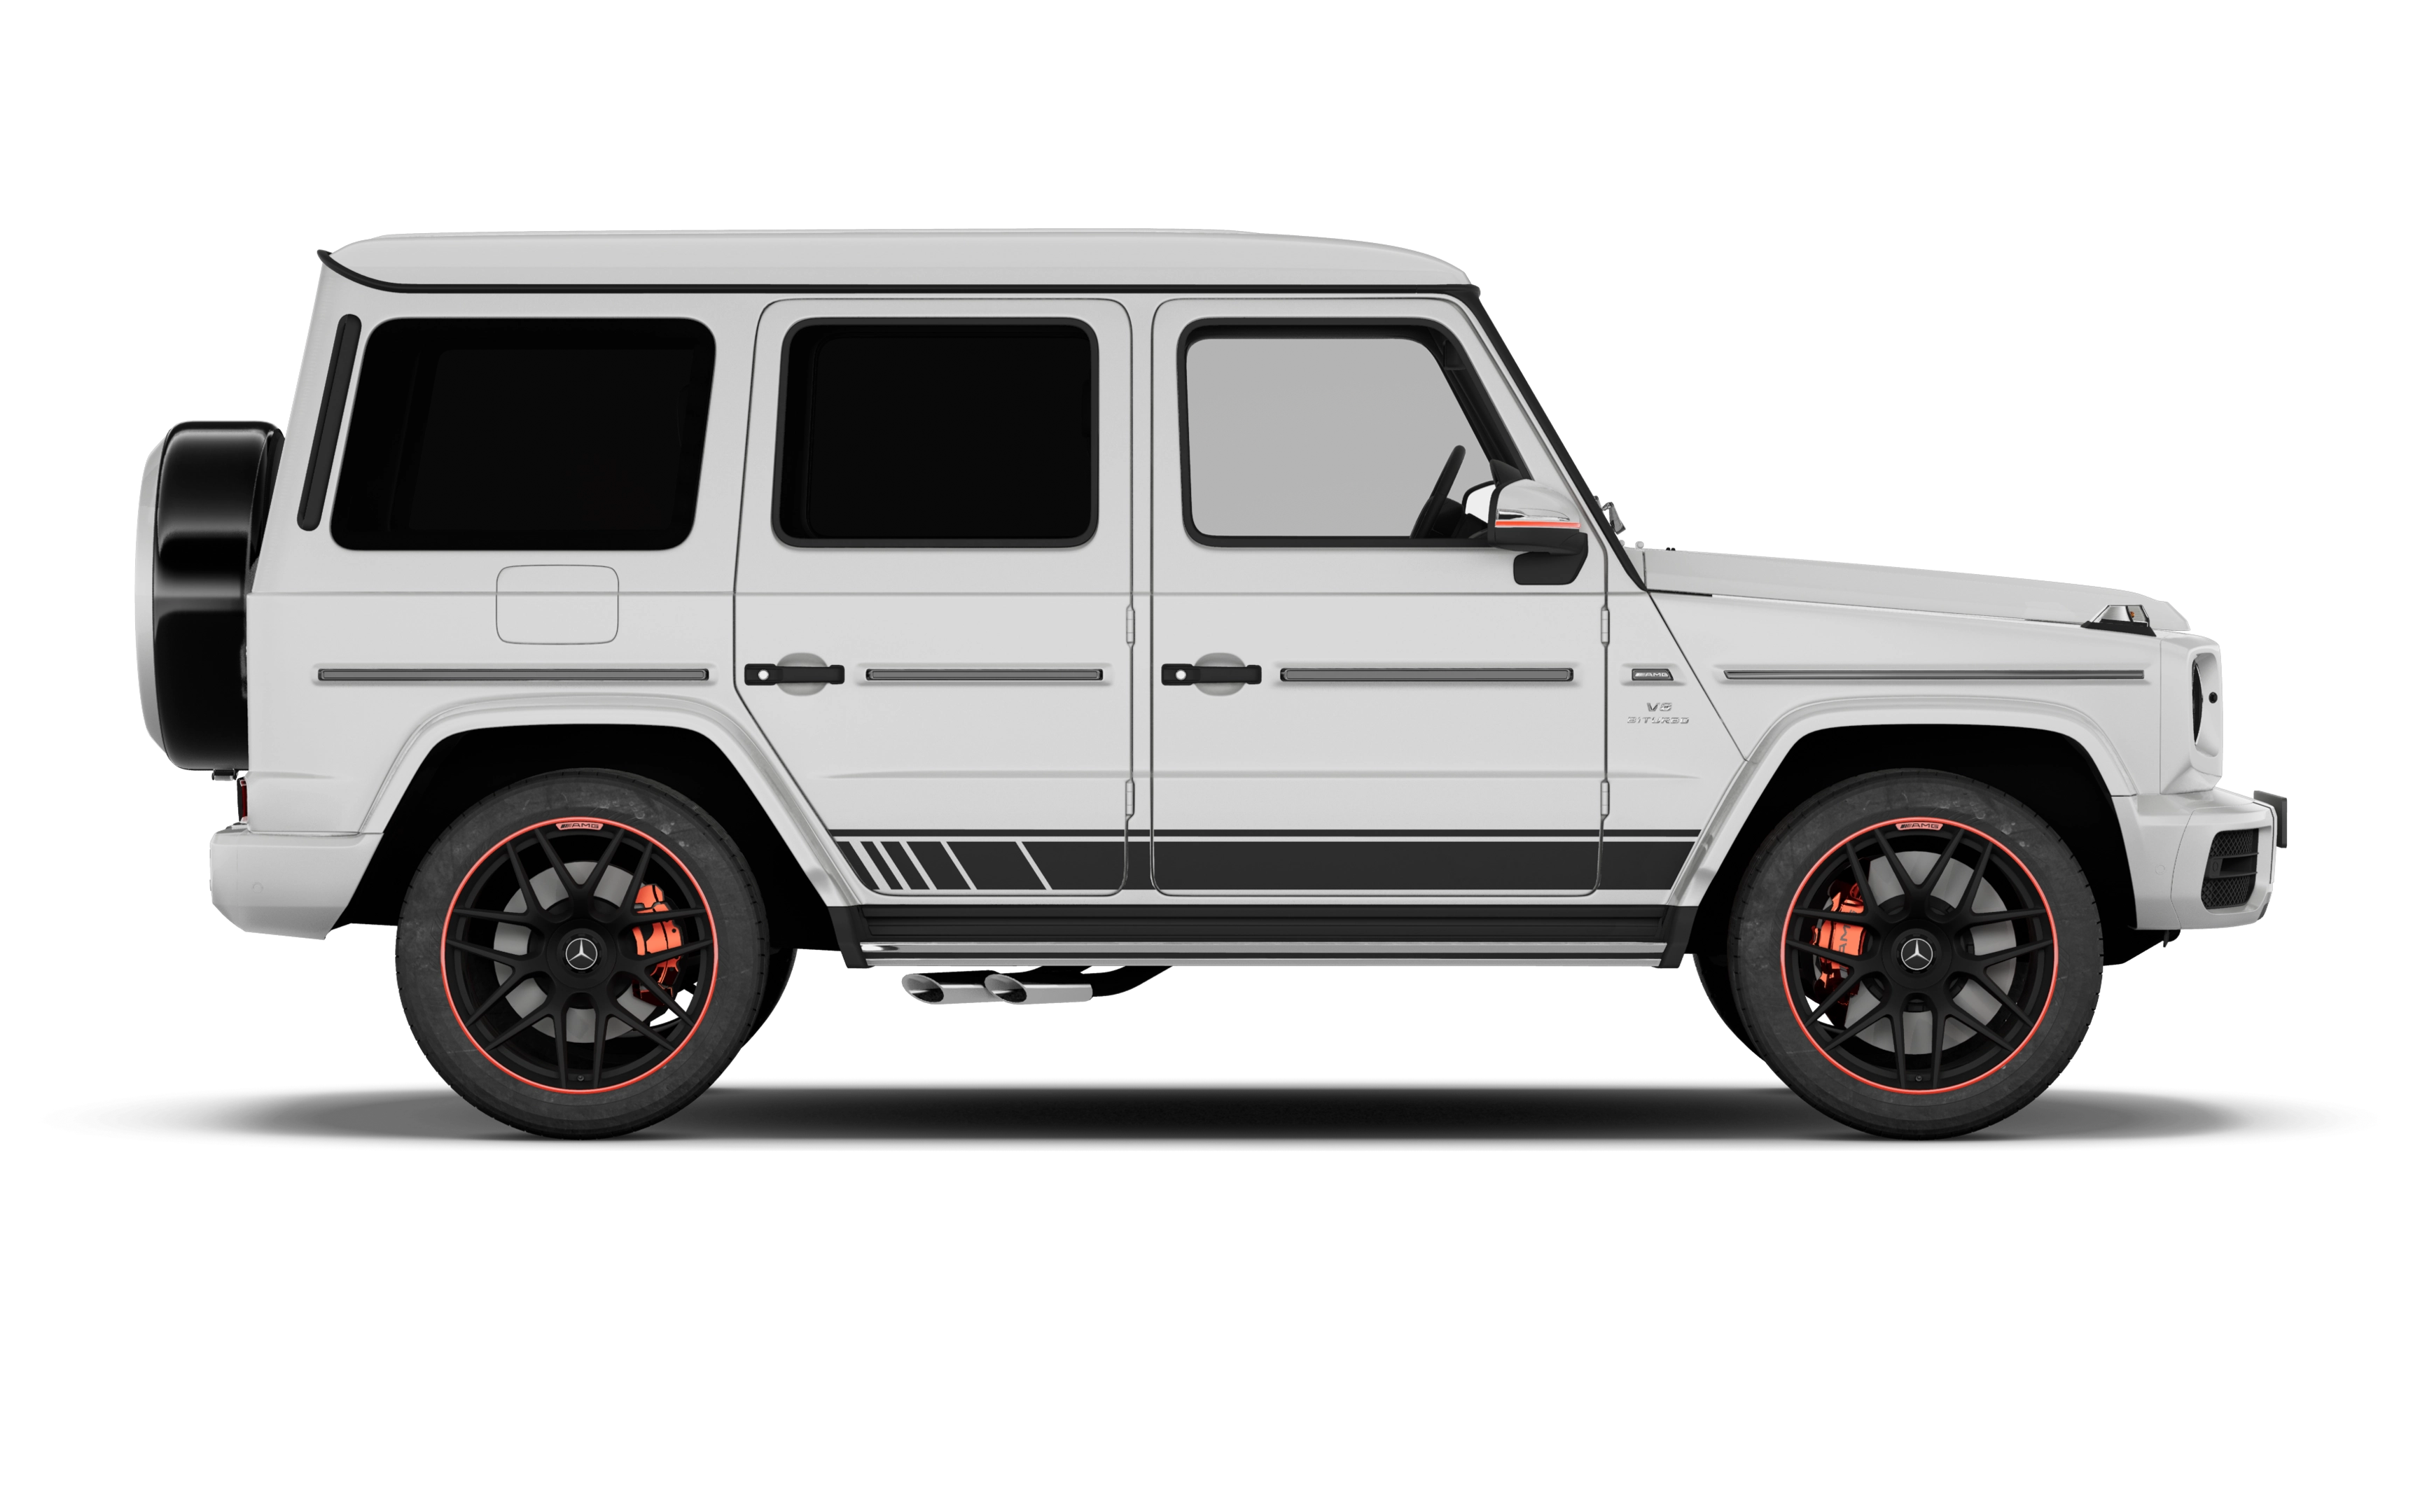 Mercedes-benz g class amg station wagon g63 carbon edition 5 doors 9g-tronic